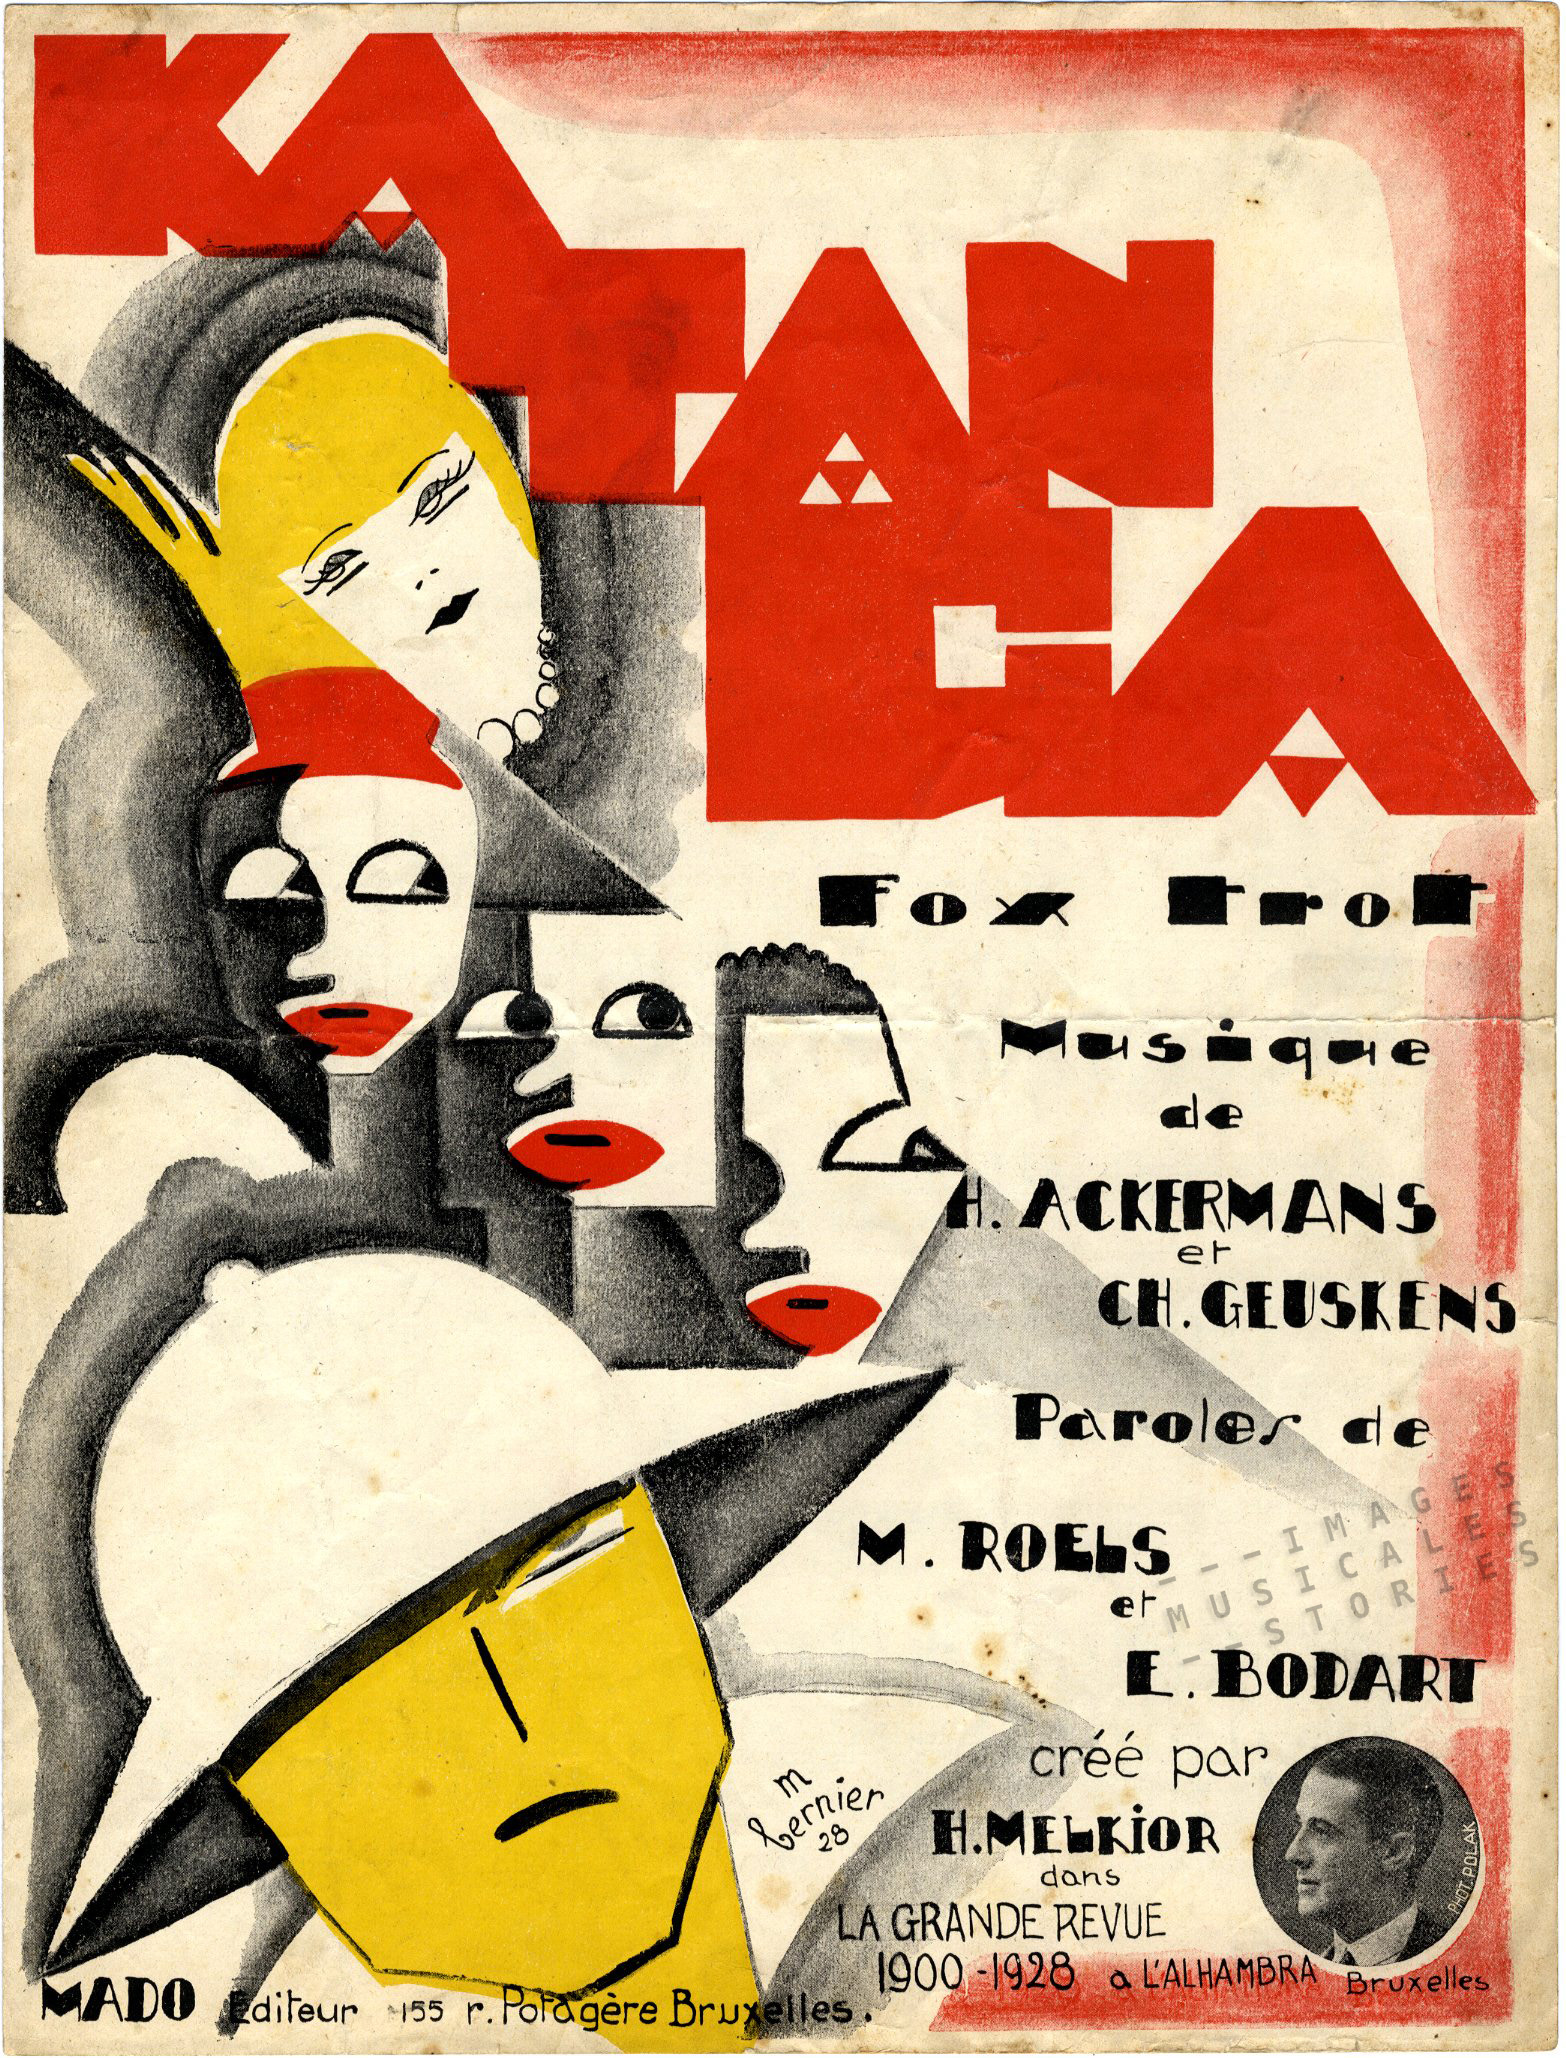 Sheet music (partition musicale) of 'Katanga', song by Hippolyte Ackermans & Charles Geuskens, lyrics by M. Roels, 1928, illustrated by Alfred Mariano Bernier.